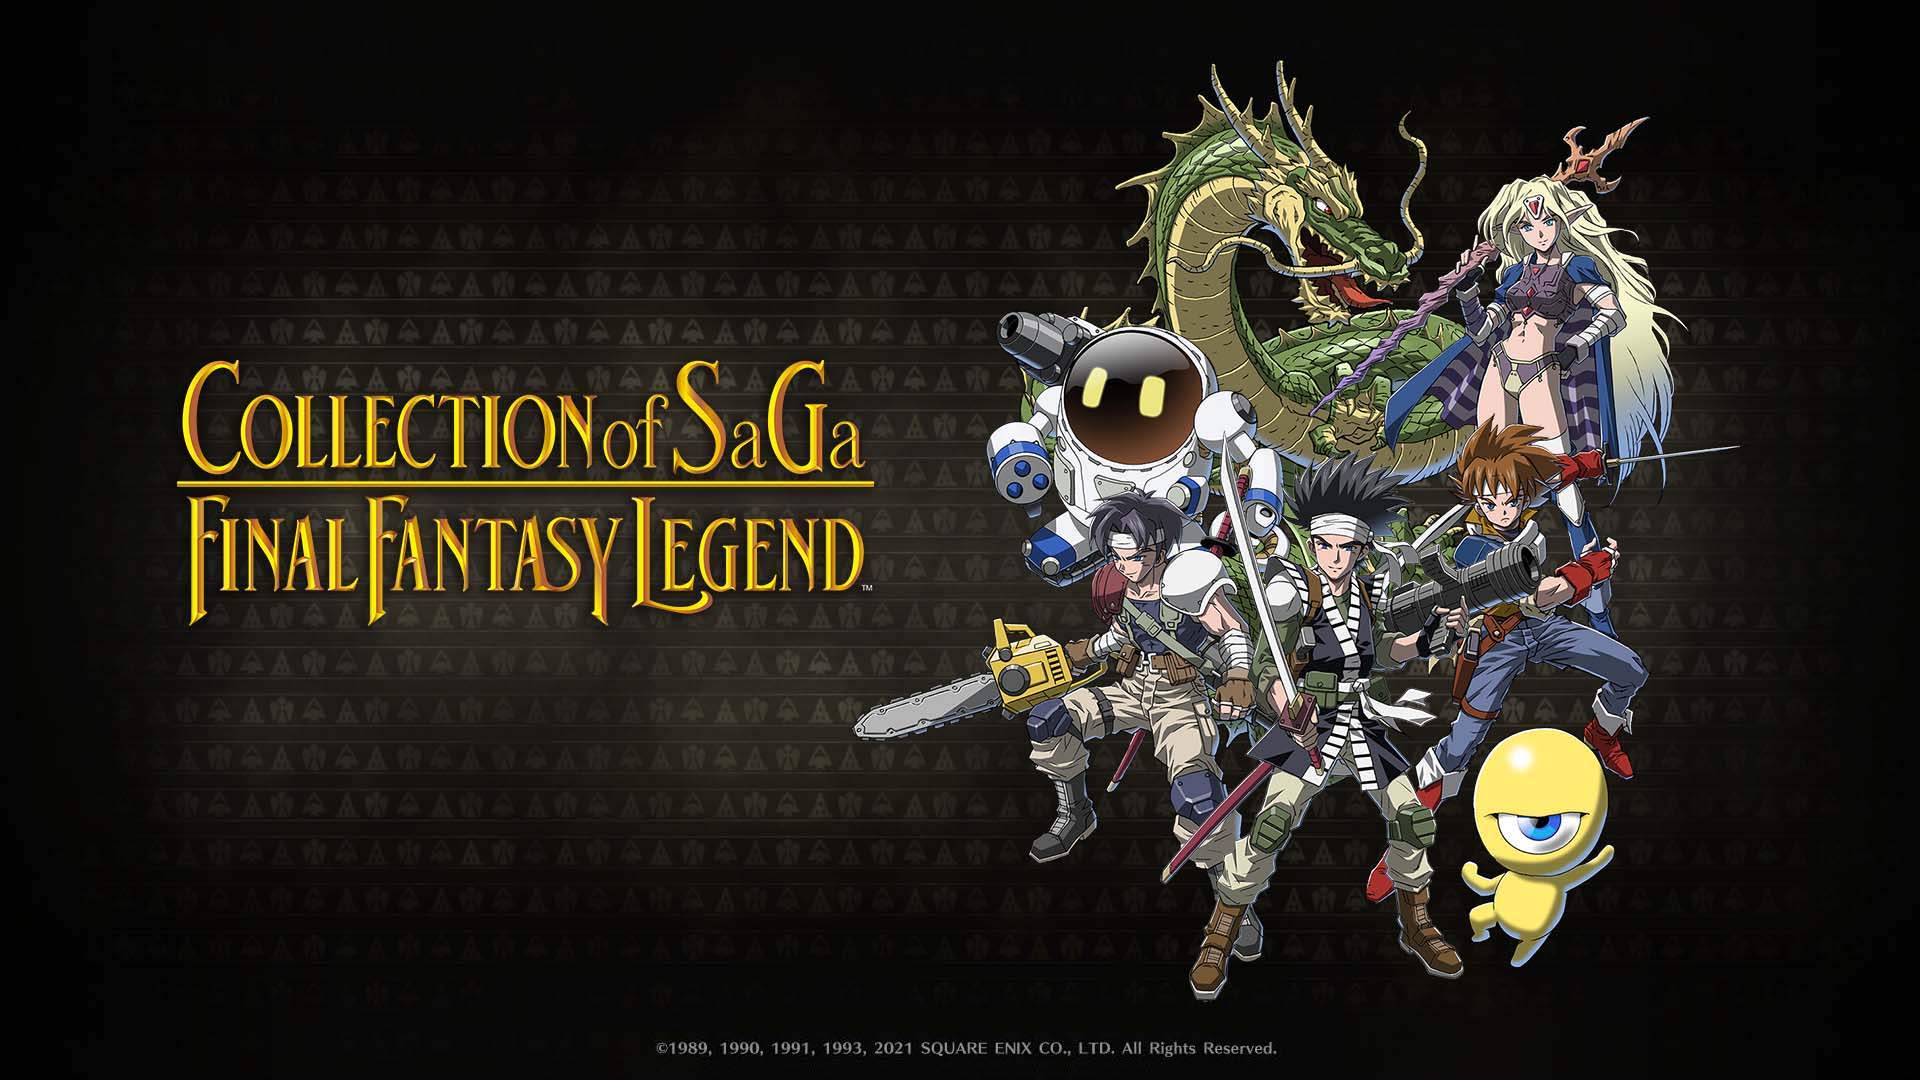 COLLECTION of SaGa FINAL FANTASY LEGEND key art showing the game logo and characters.